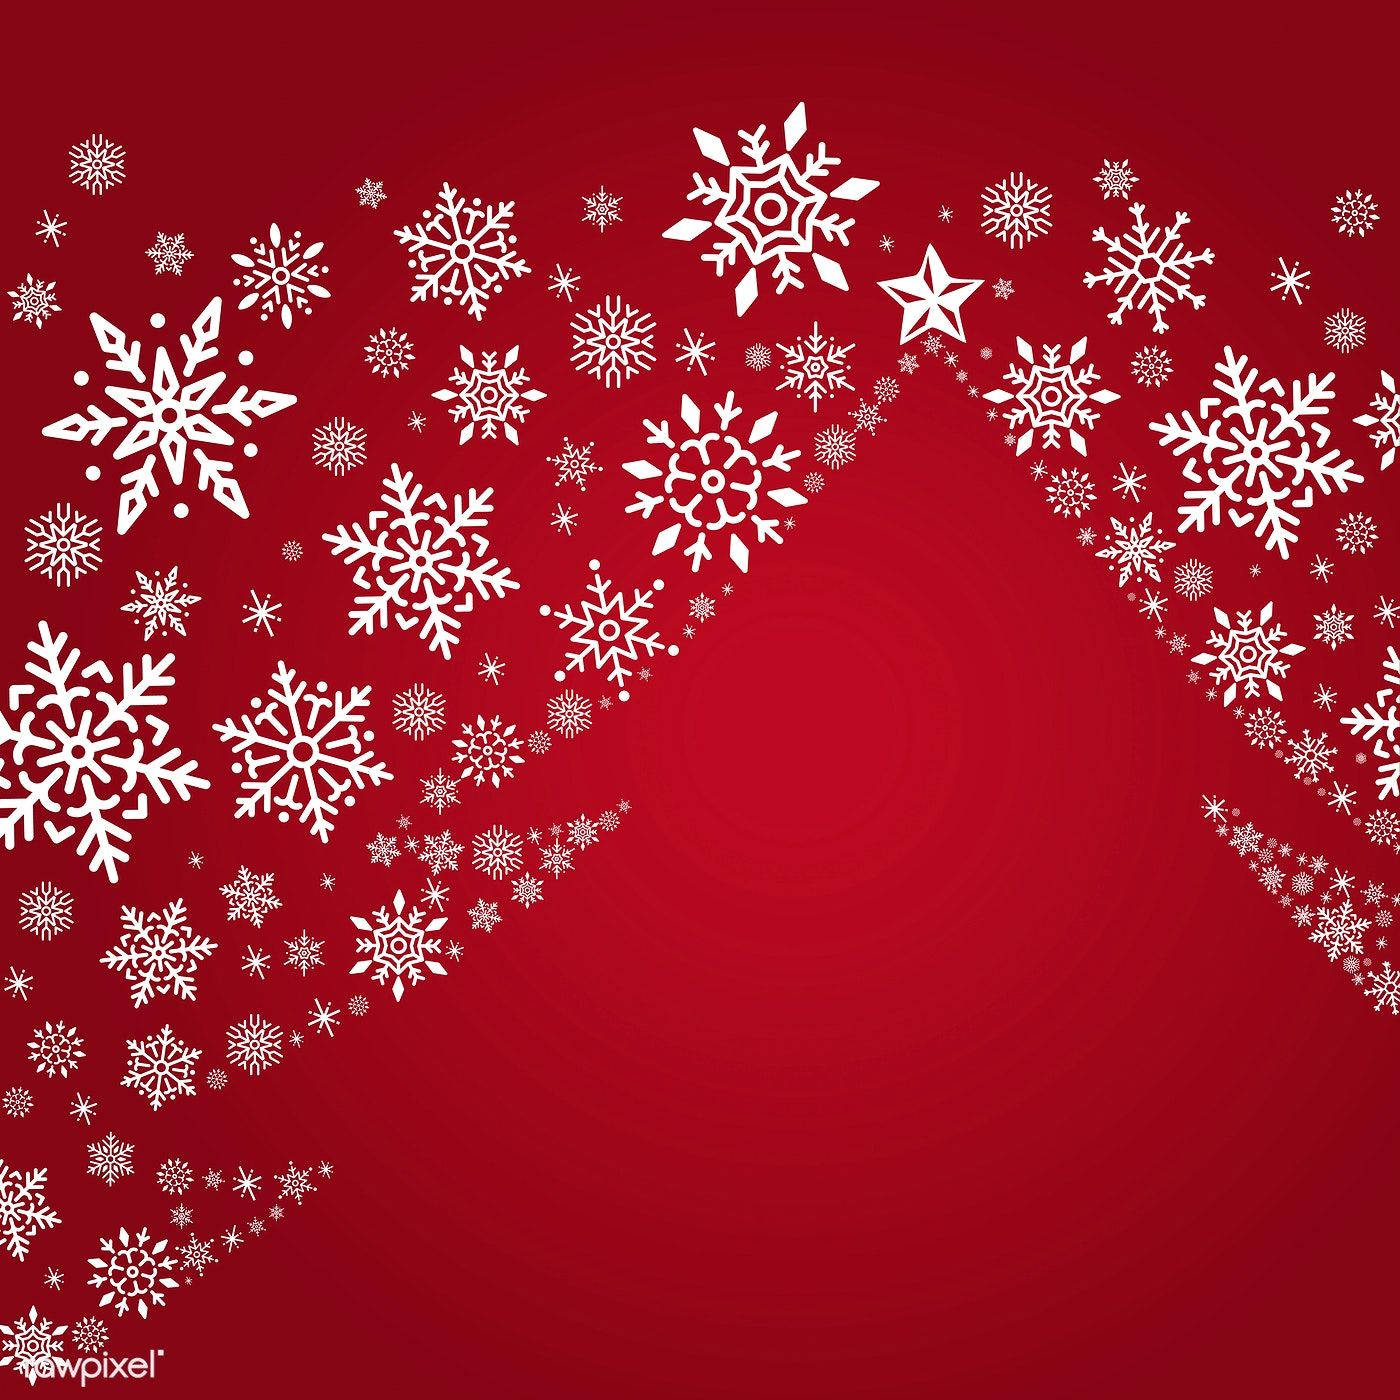 Snowflakes Artwork In Red Christmas Background